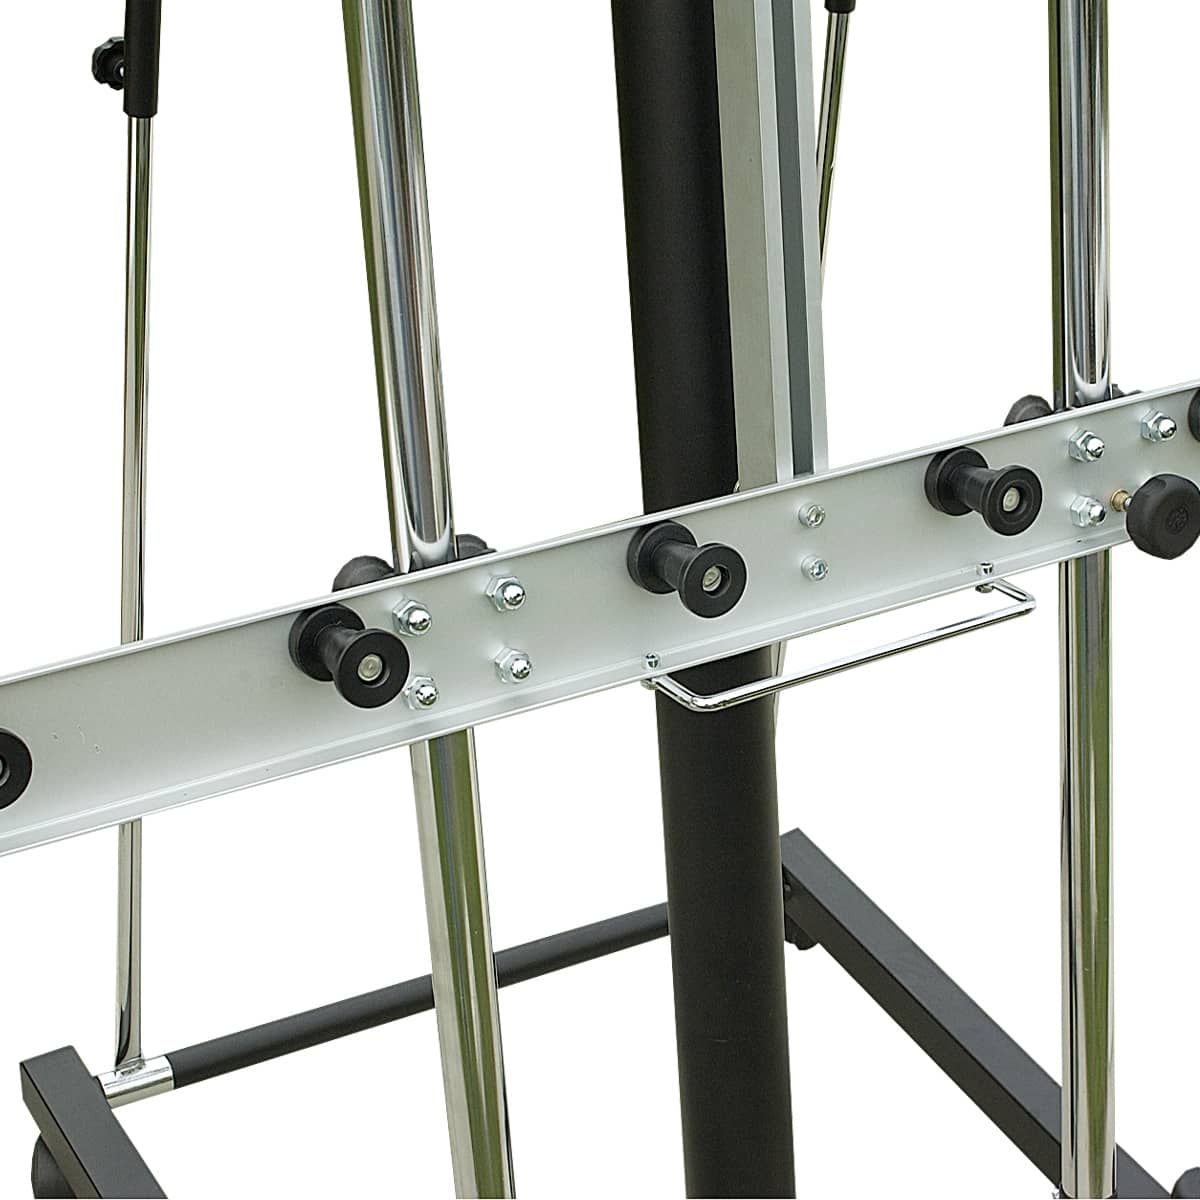 Move canvas horizontally on Delrin roller wheels strategically positioned on canvas holders